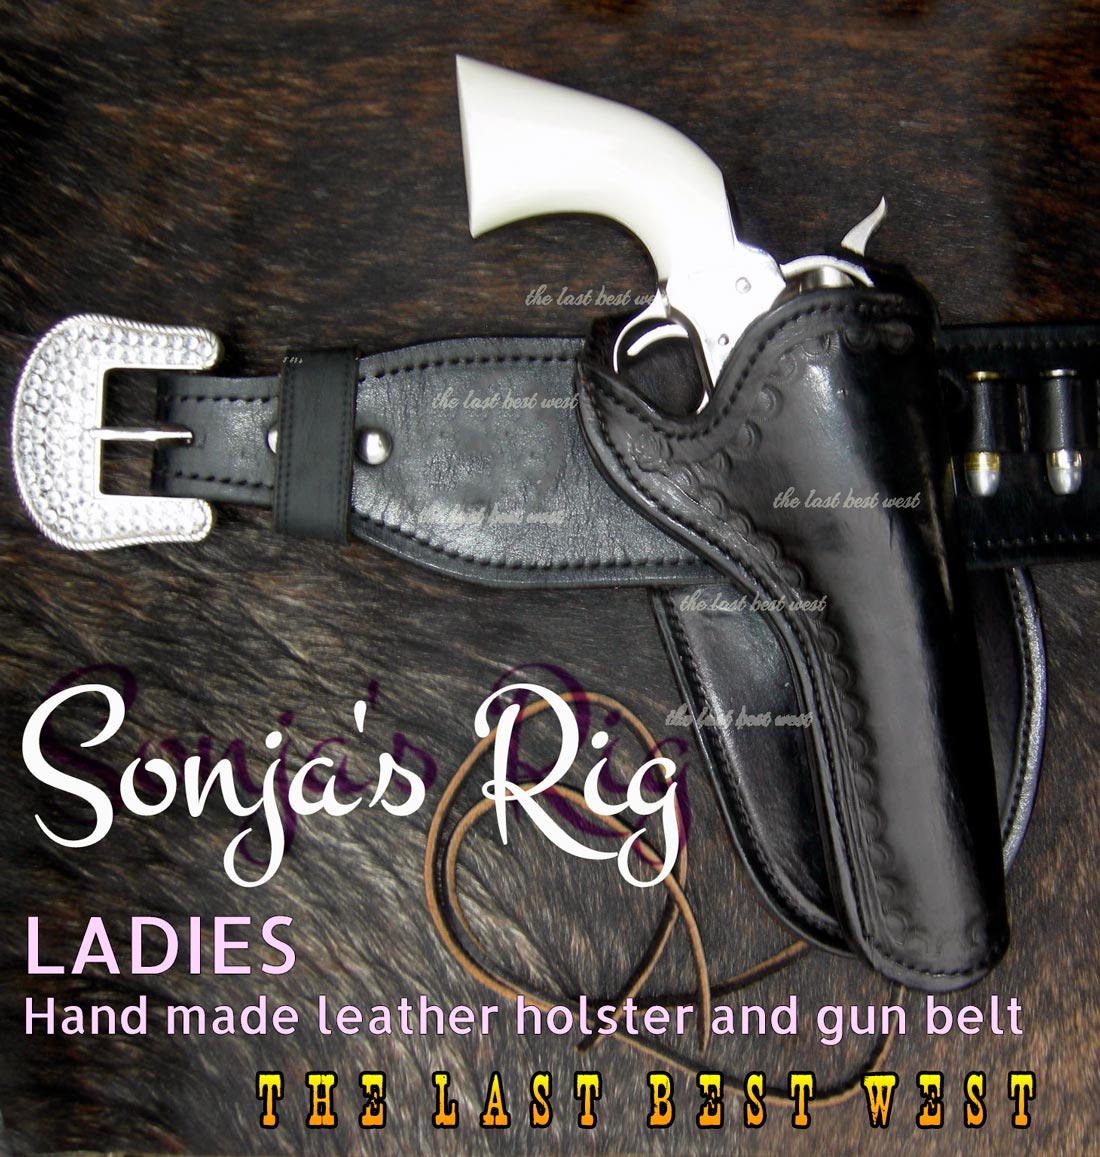 Ladies Hand made leather holster and belt